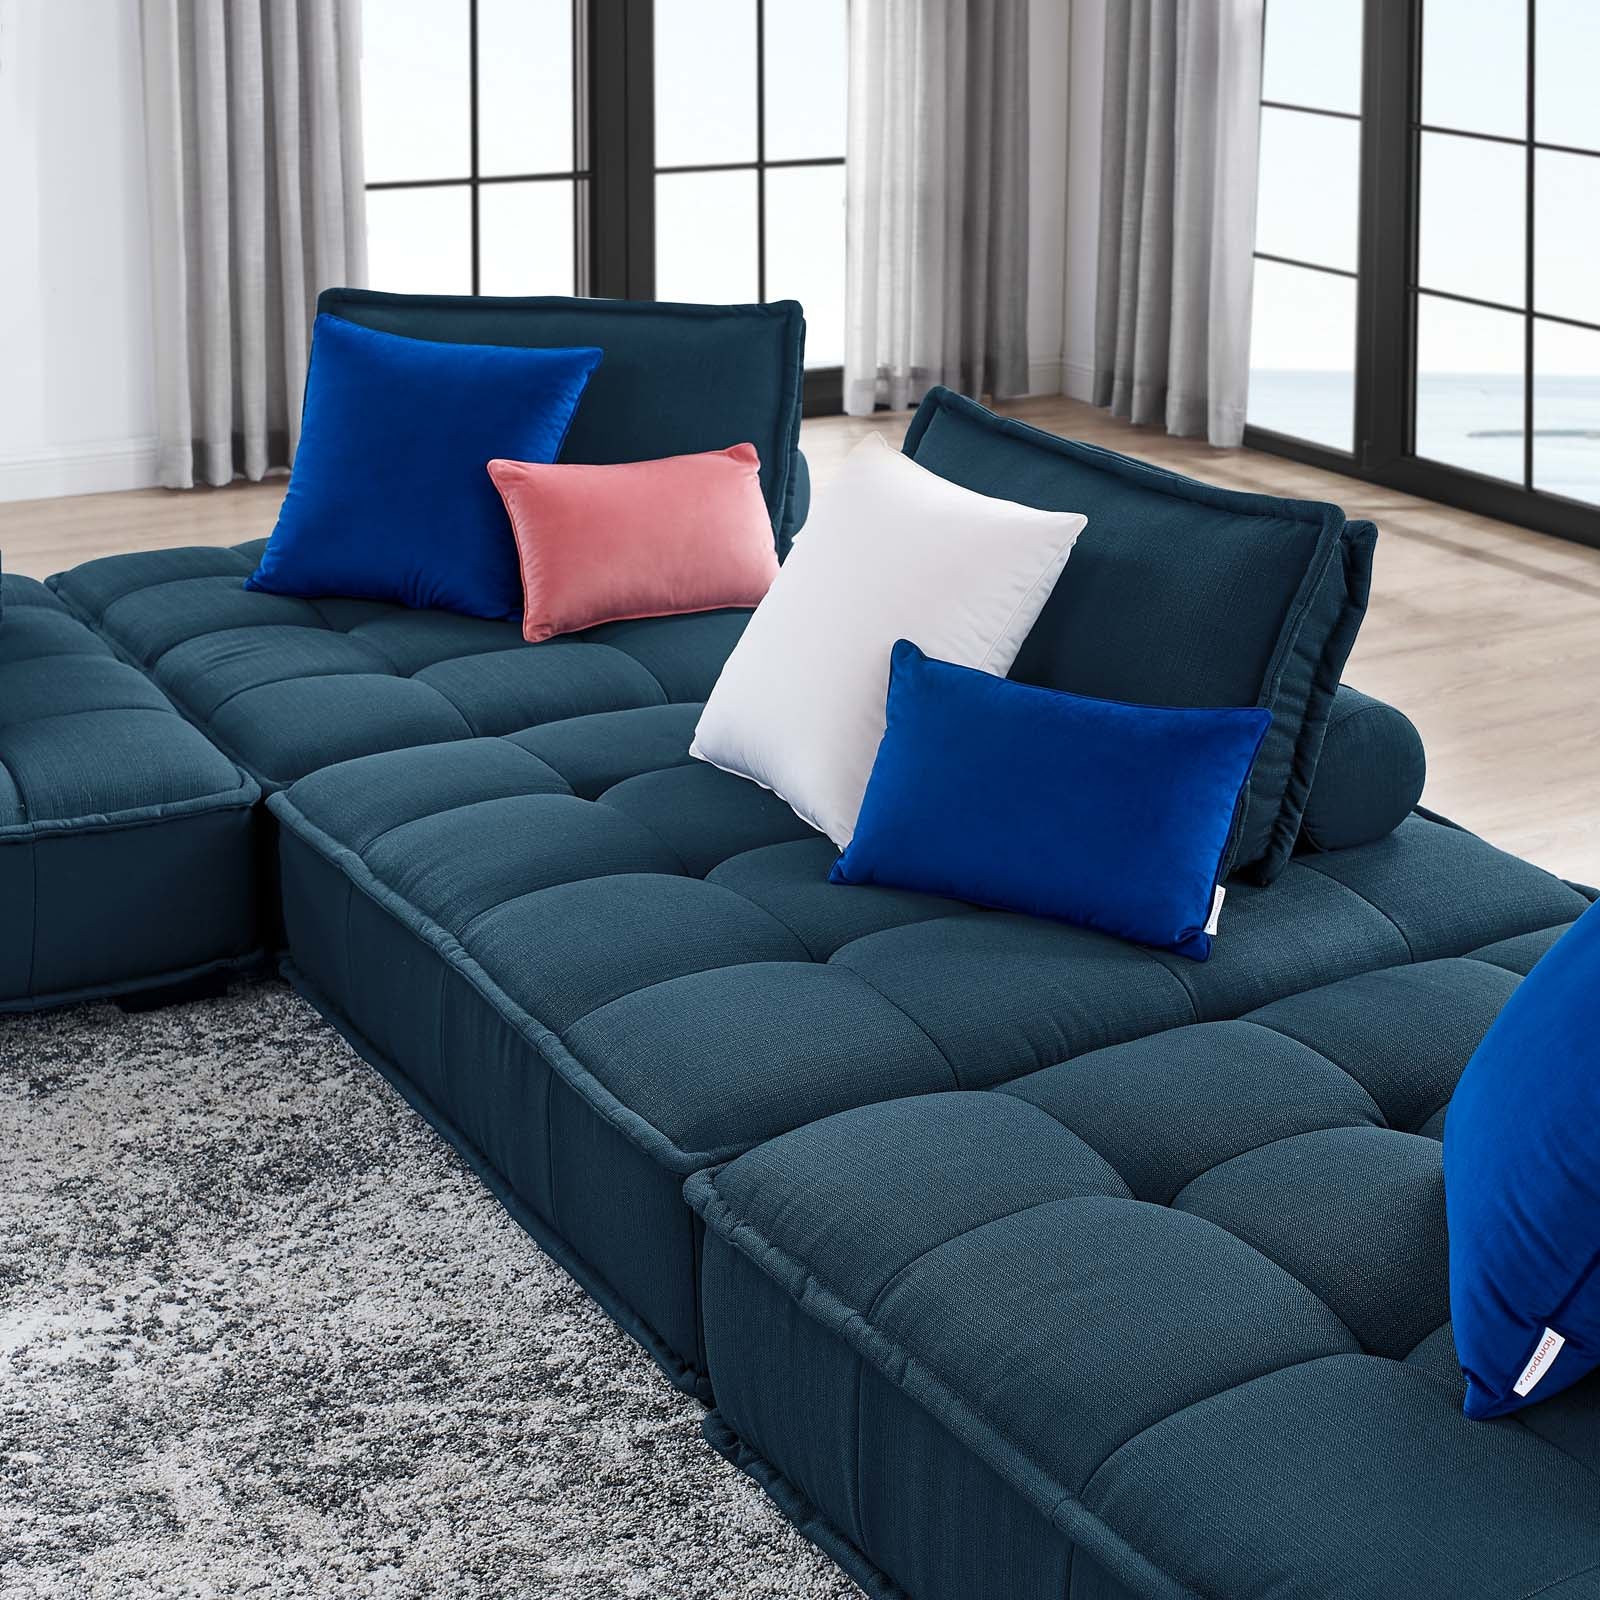 Saunter Tufted Fabric 4-Piece Sectional Sofa - East Shore Modern Home Furnishings